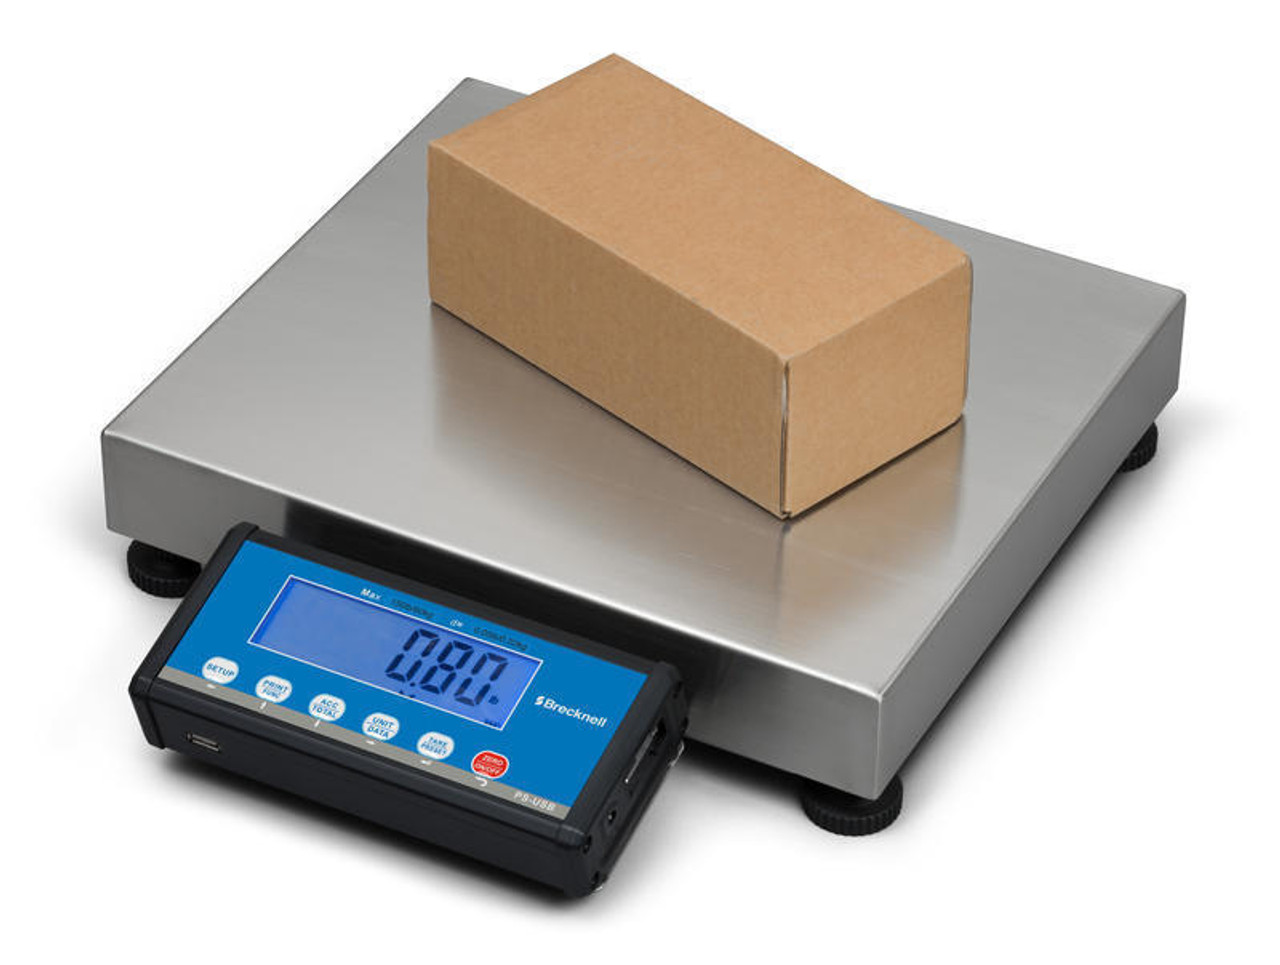 Handheld Postal Scale - Boxed in 30 pieces